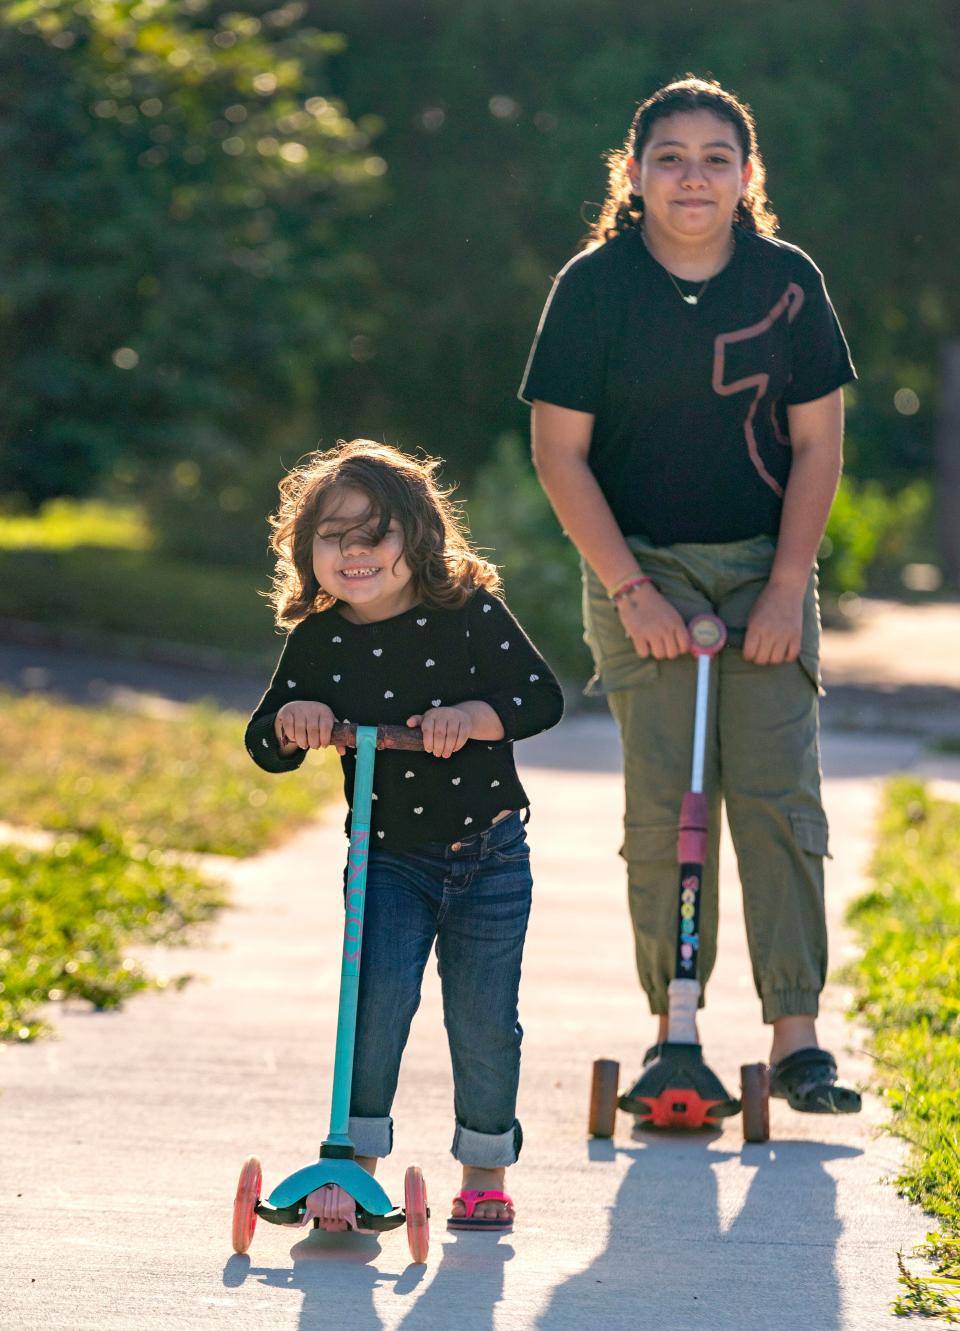 Amy Galeano, 4, rides scooters with her sister Alondra, 9, outside their home in Lake Worth Beach.